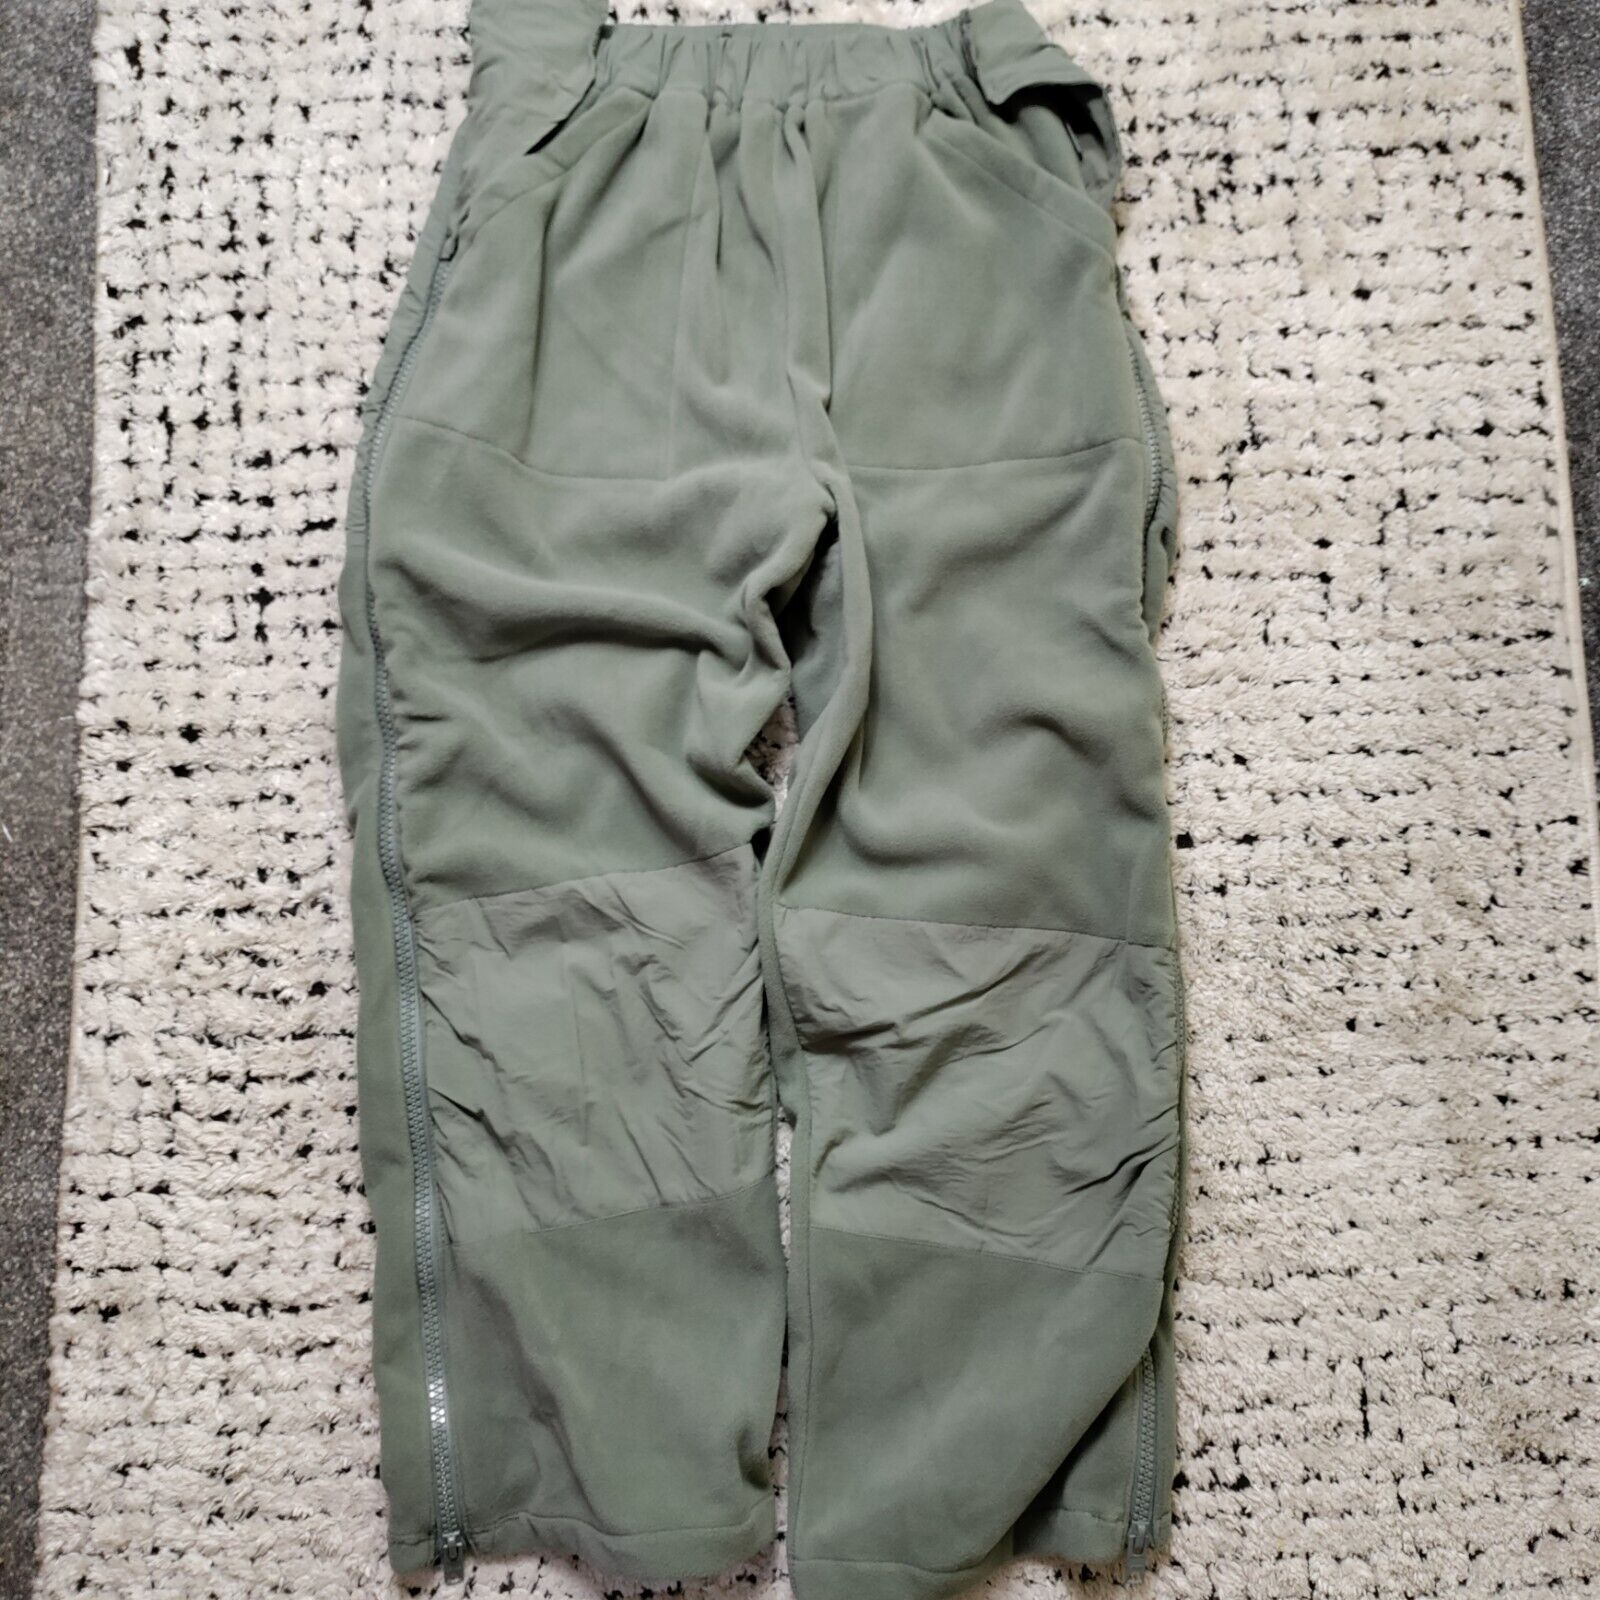 US Military Pants Cold Weather Synthetic Fleece 2XL Green 8415-01-546-7536P